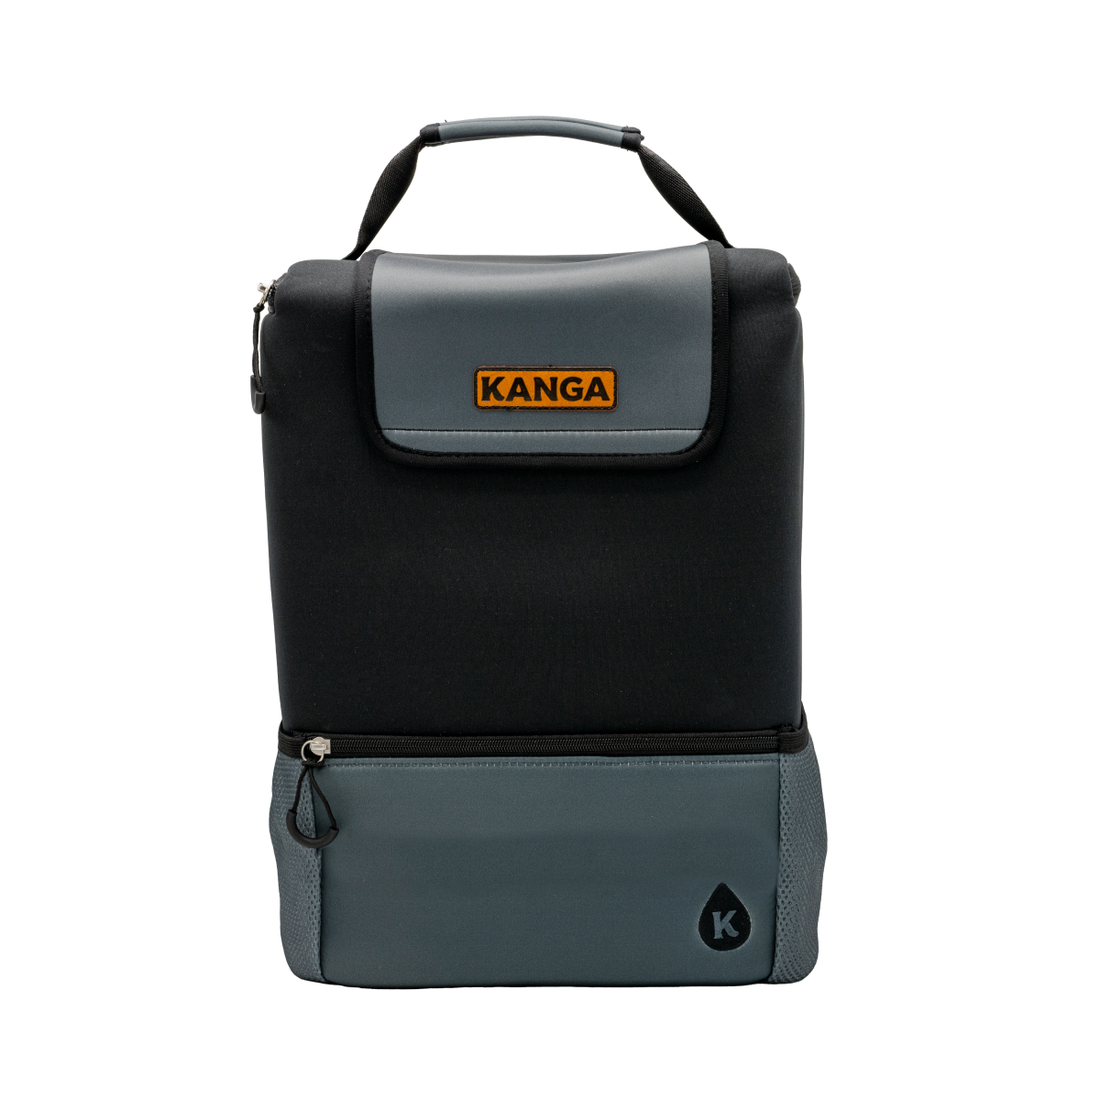 Kanga Pouch 24 Pack Backpack